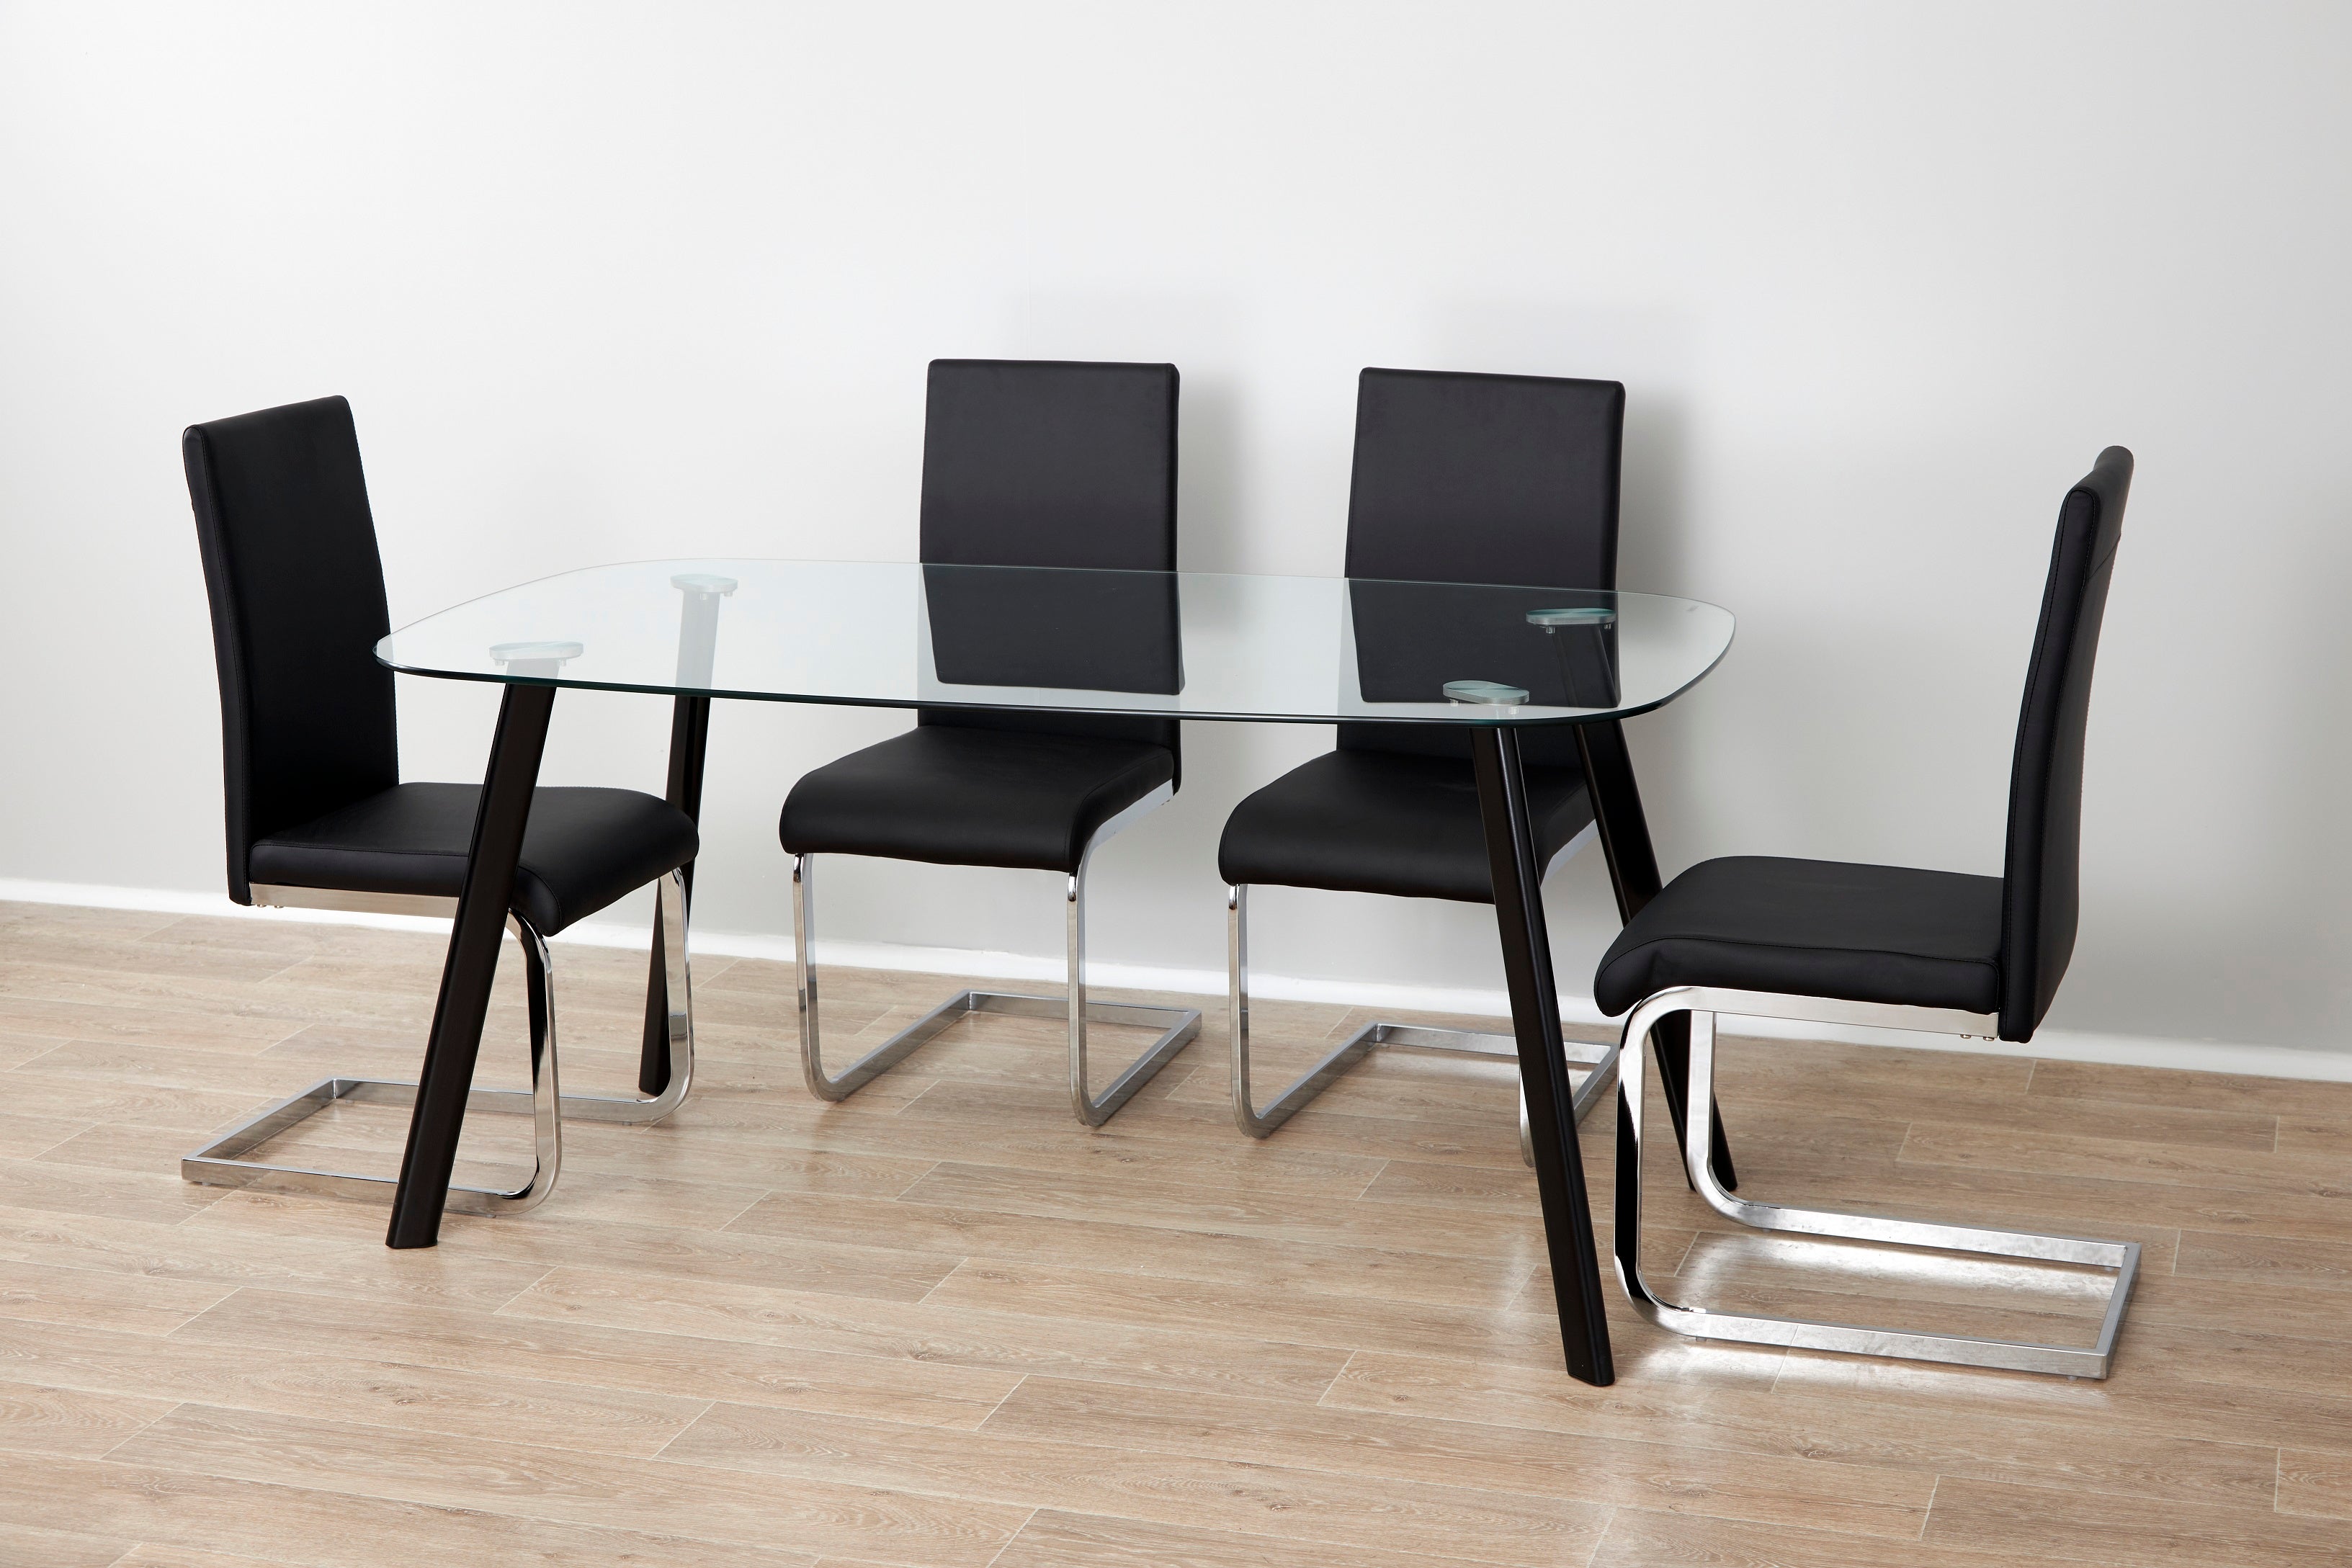 Black Legs Dining Table + 4x Black PU Leather Chairs